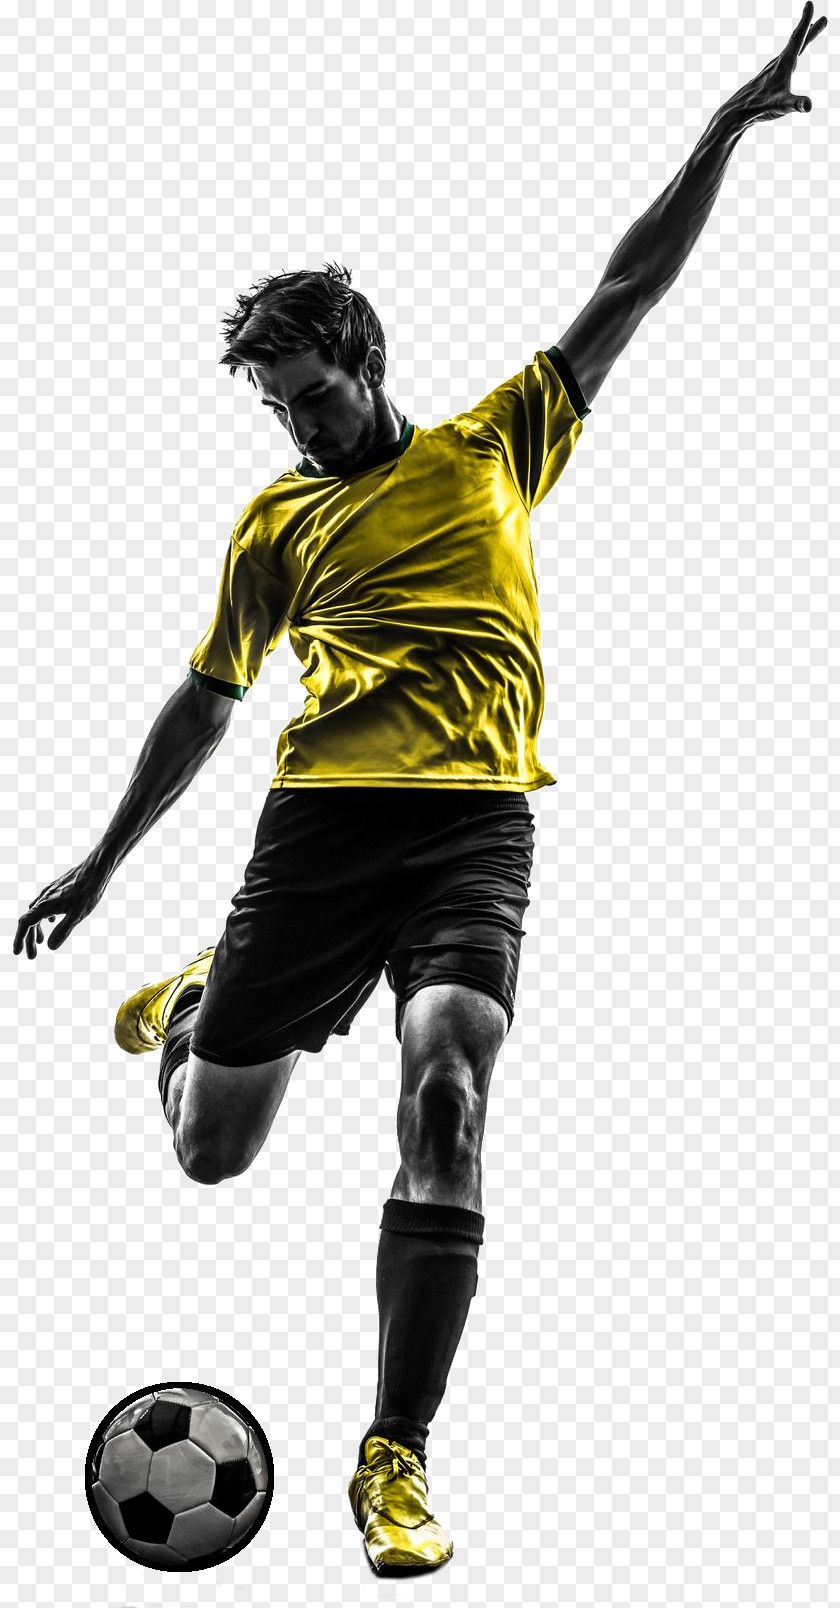 Soccer Silhouette Shooting 2014 FIFA World Cup Five-a-side Football Player Jersey PNG